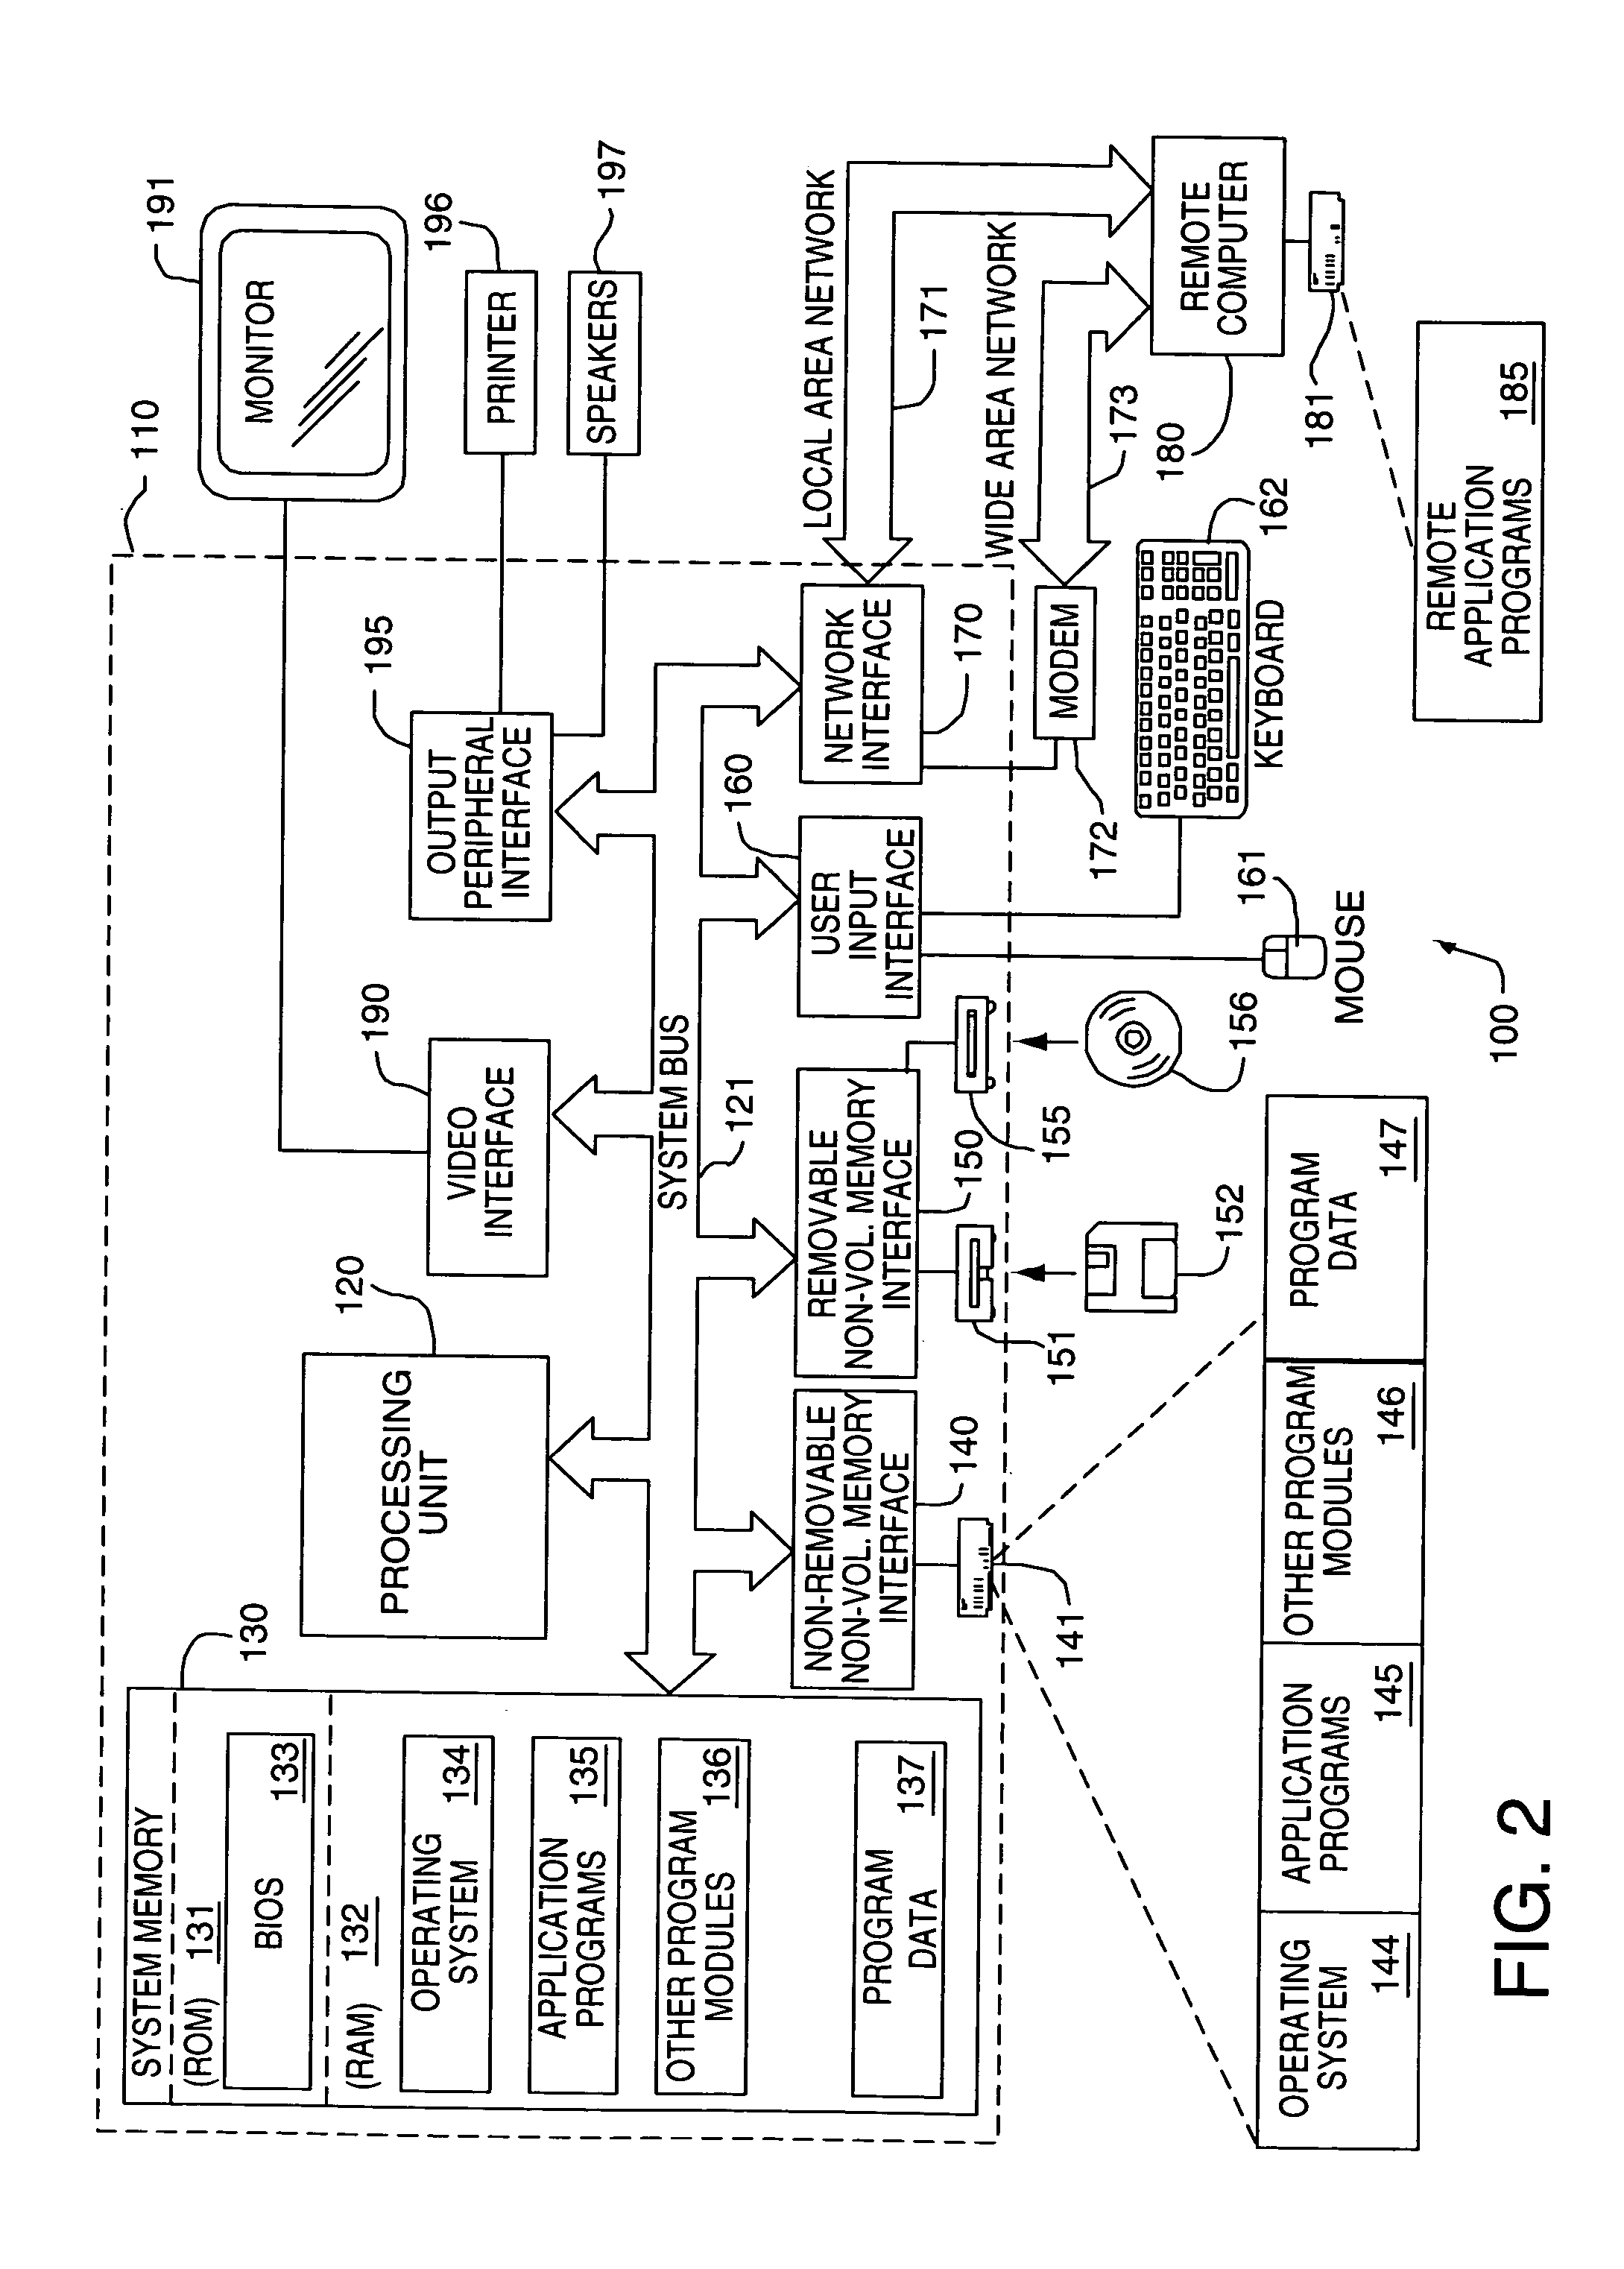 System and method for providing an interactive display